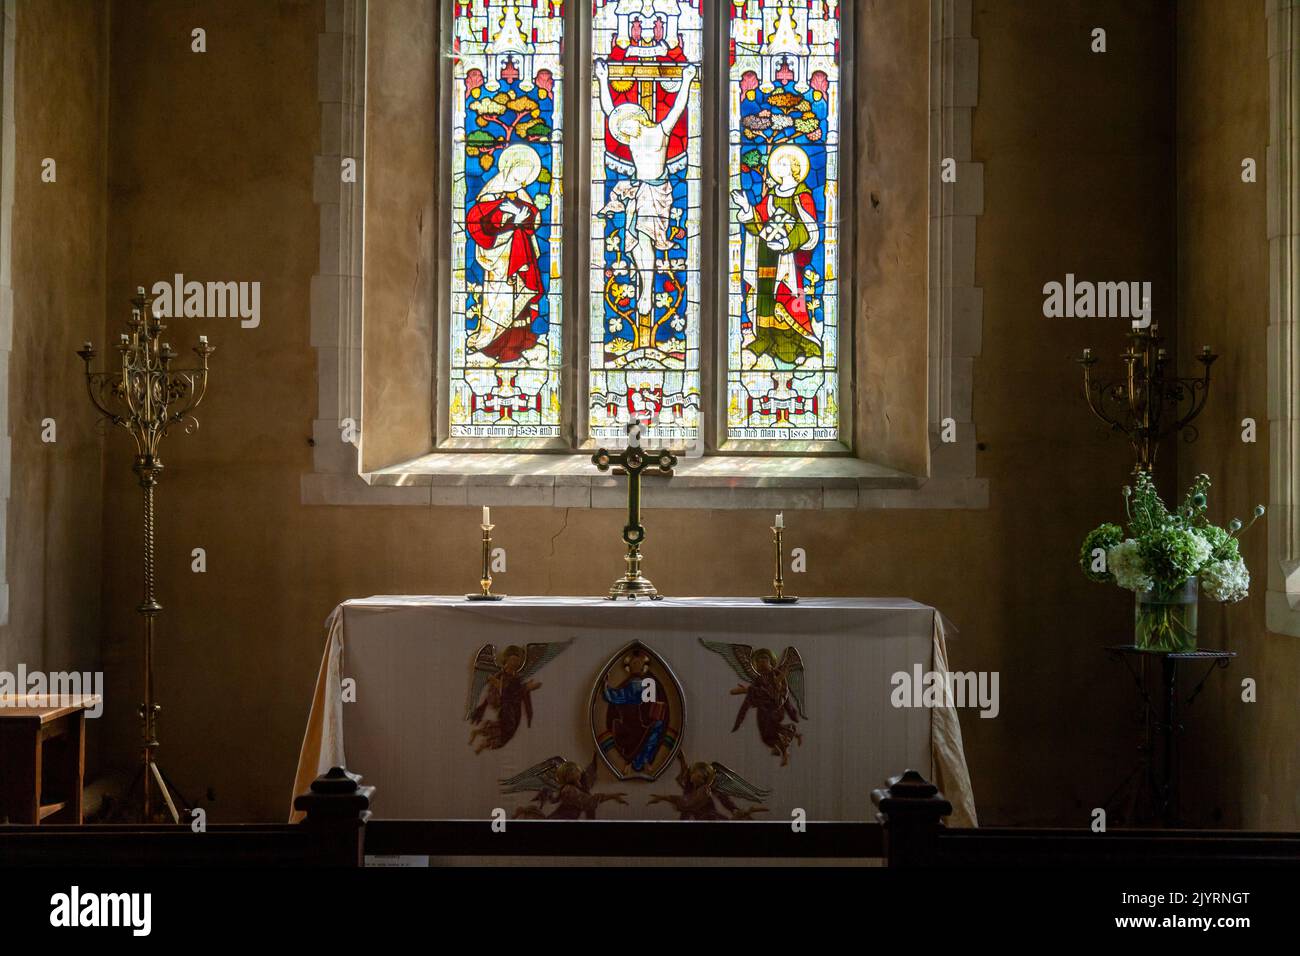 The Alter in St Andrews Church Nether Wallop, Hampshire, Inglaterra Foto de stock